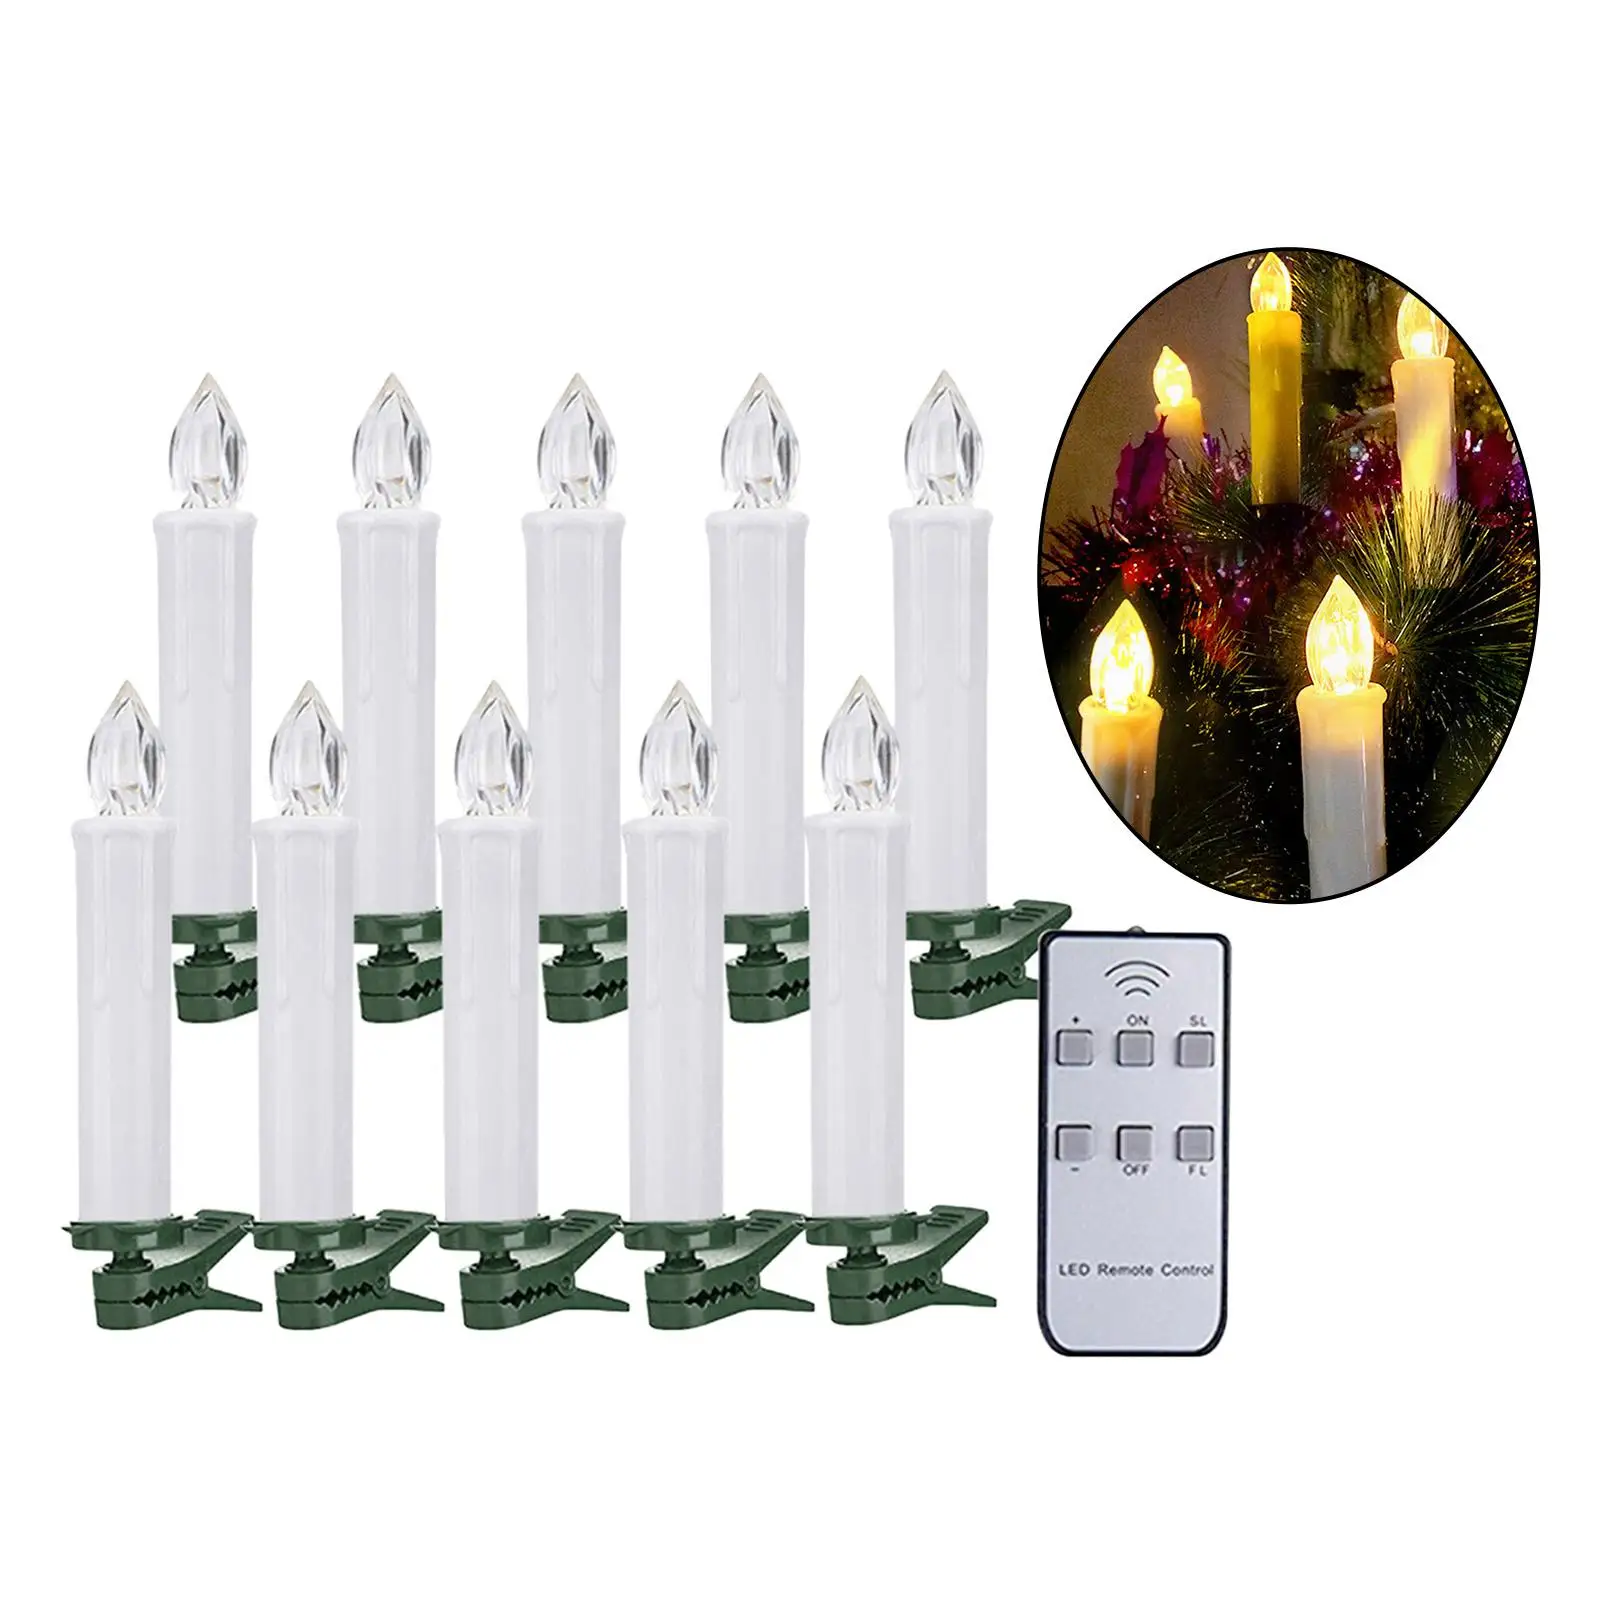 10pcs LED Taper Candles Light, Battery Powered Flameless Candles with Clips for Chirstmas Tree Party Wedding Decoration Gift